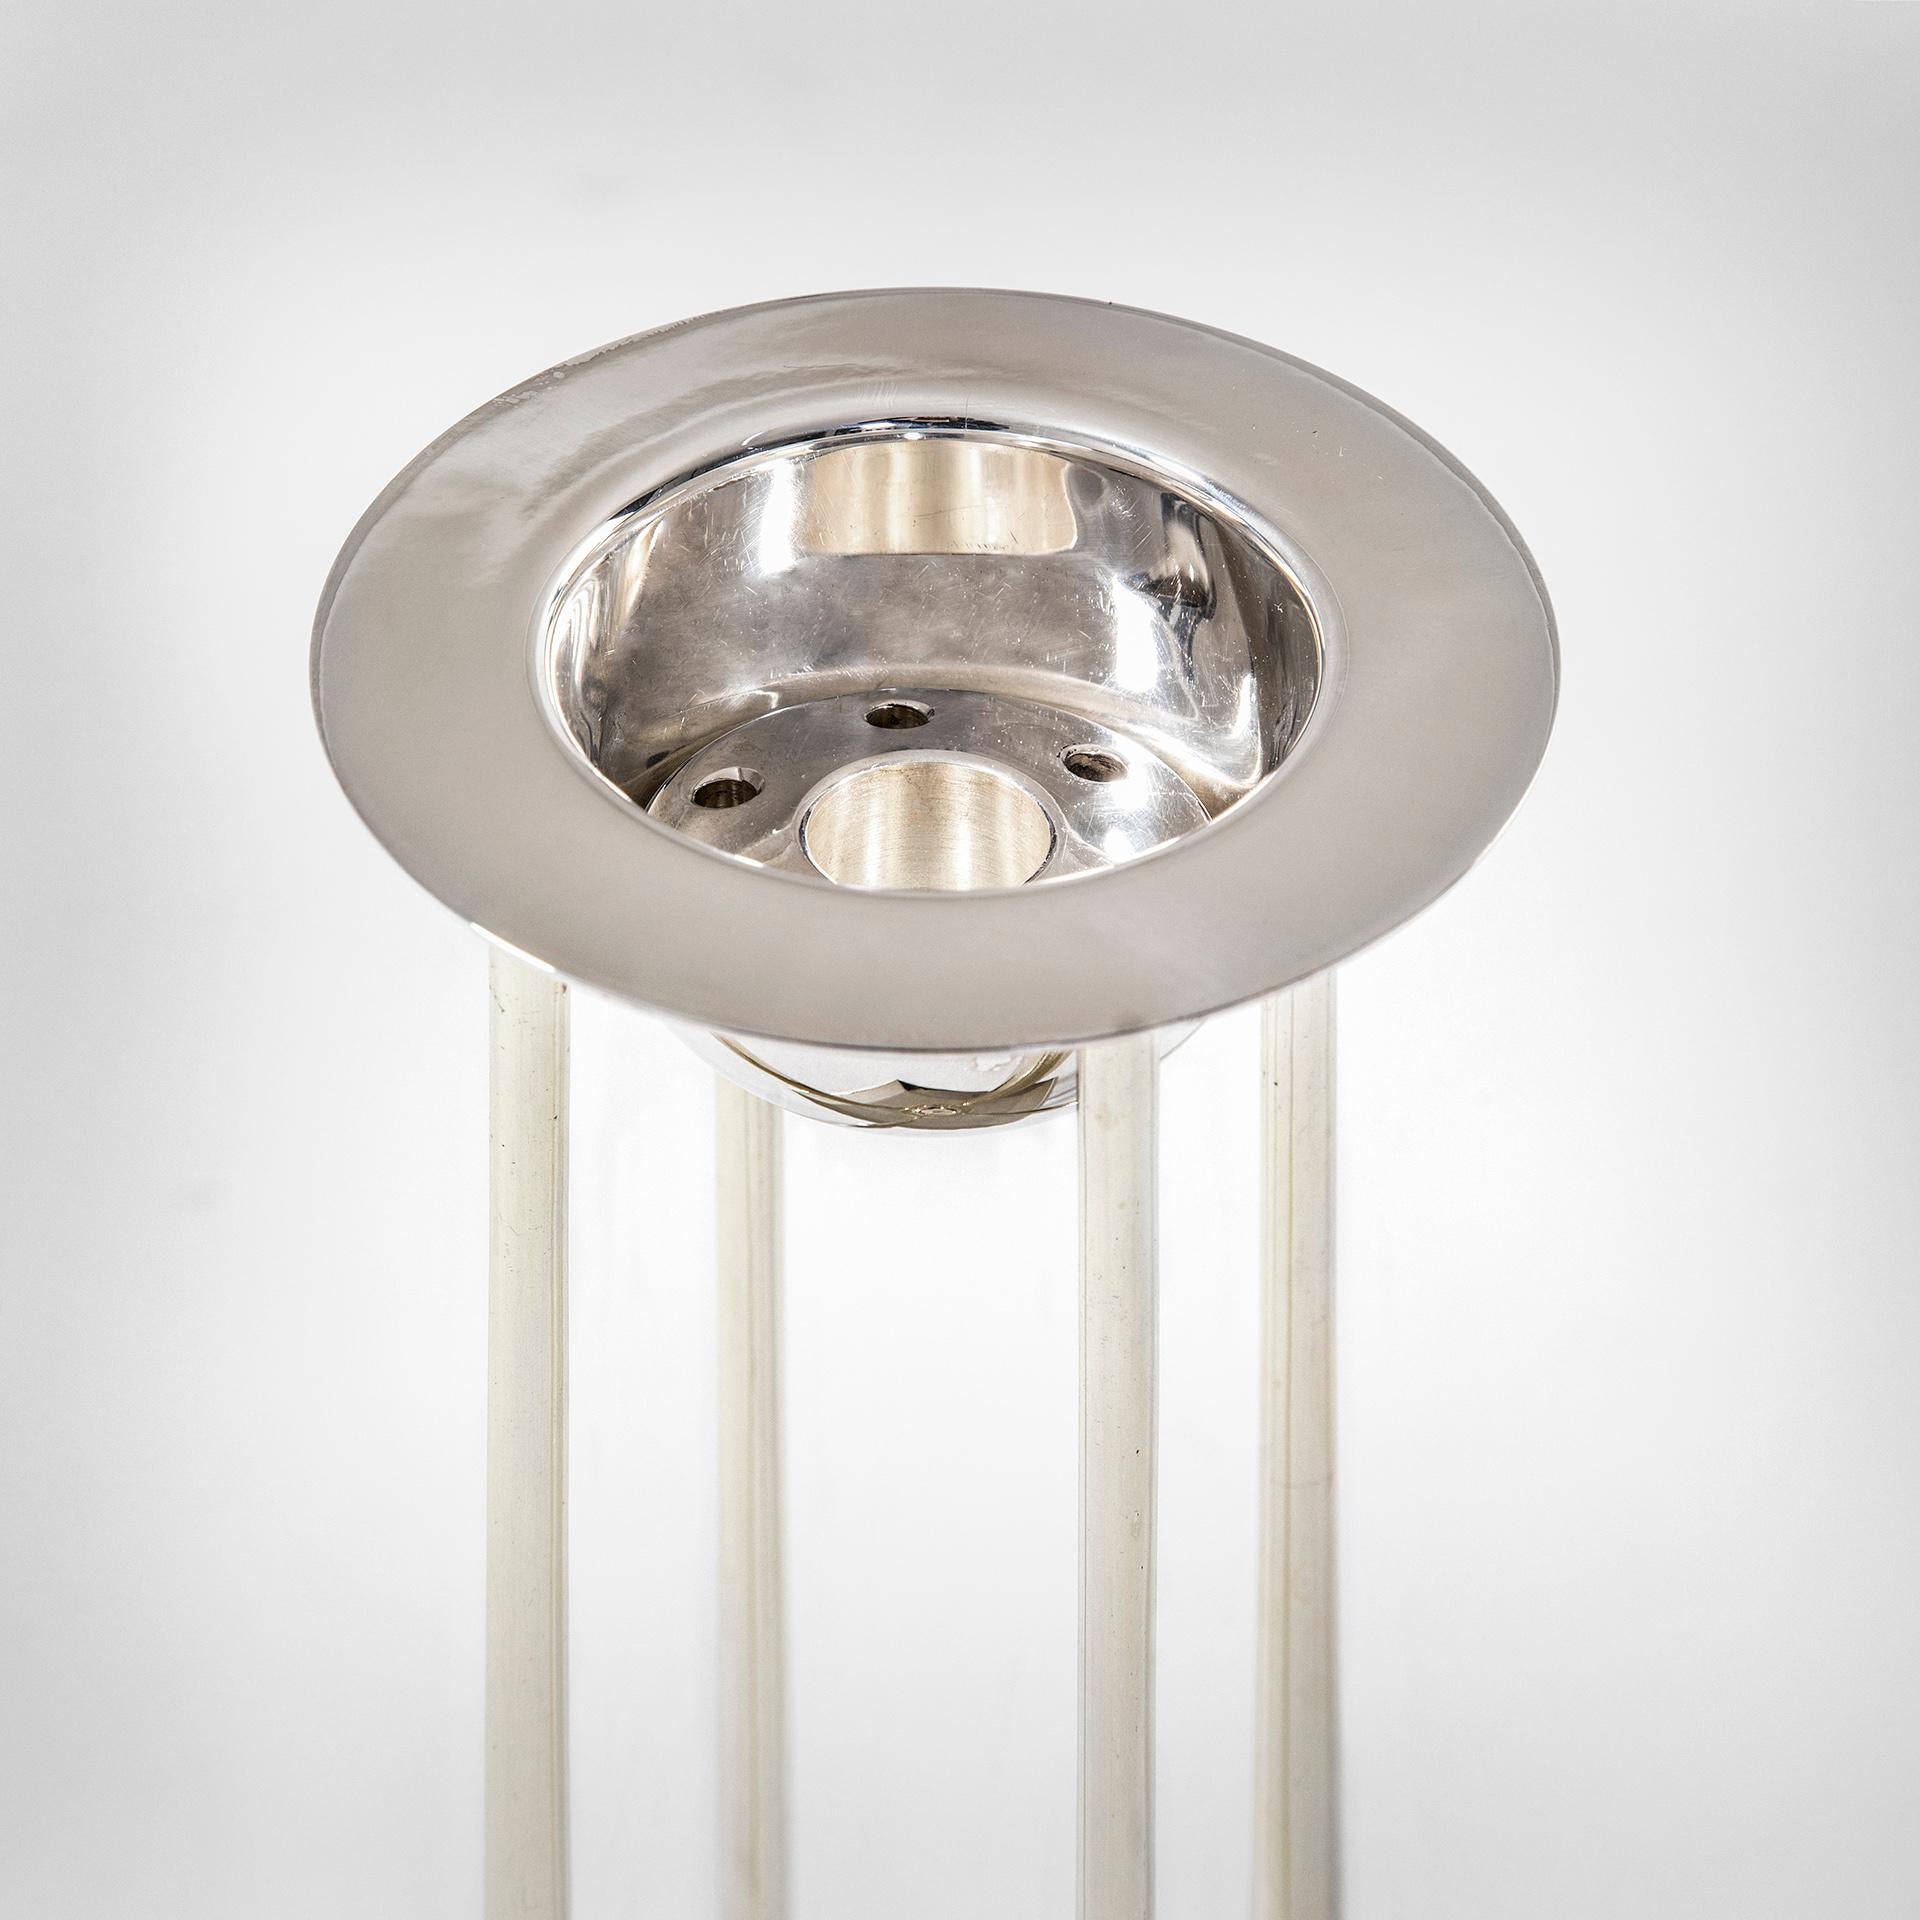 Mid-Century Modern 20th Century Mackintosh Candle Holder Mod. Cranston Reproduced by Sabattini For Sale